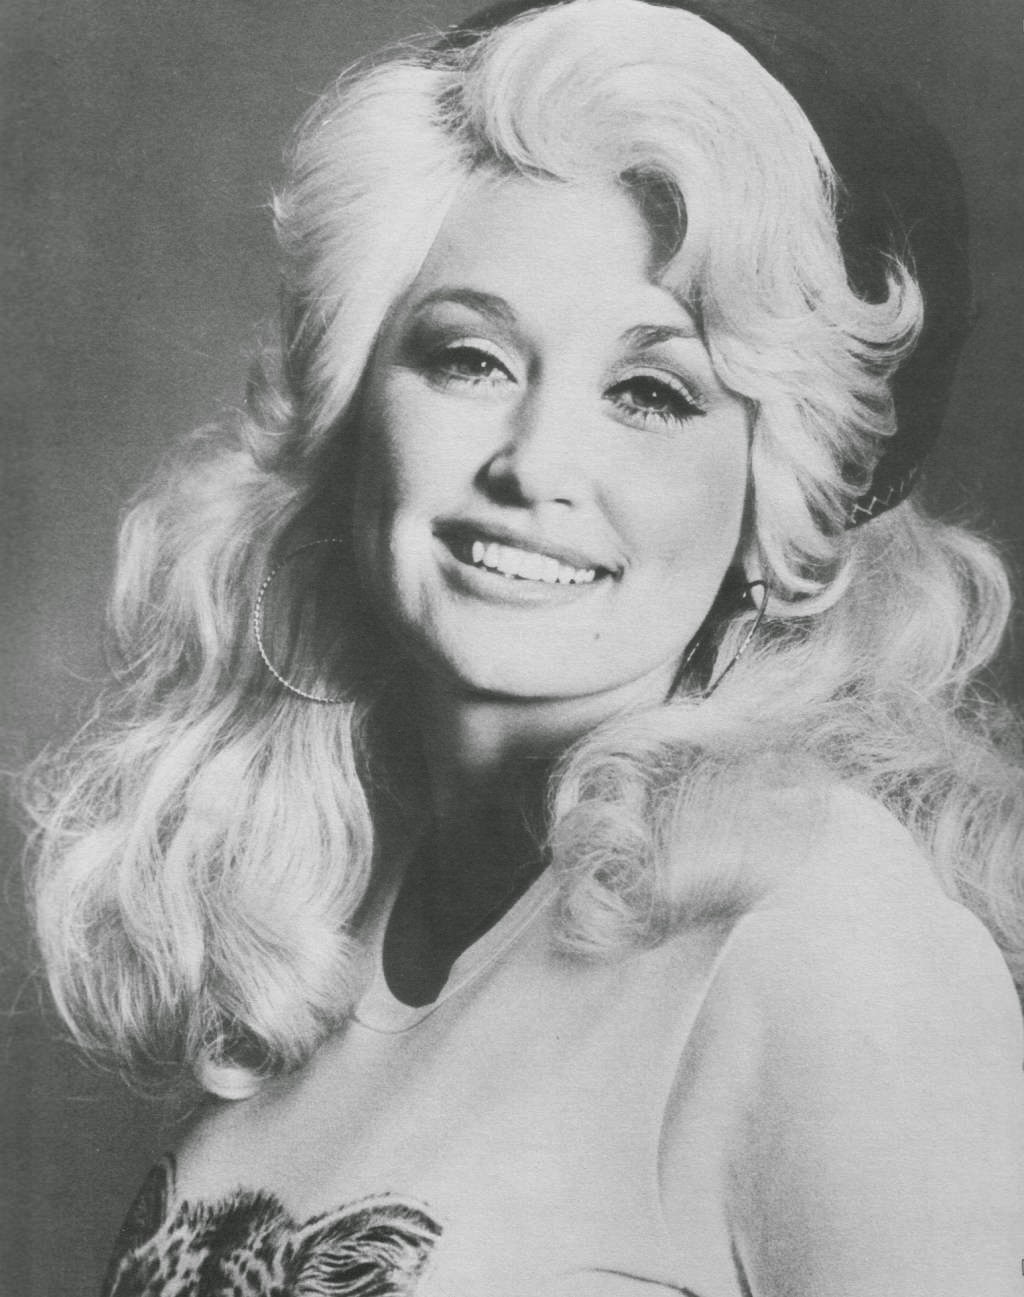 20 Beautiful Portrait Photos of Dolly Parton in the 1970s ~ vintage everyday1024 x 1297